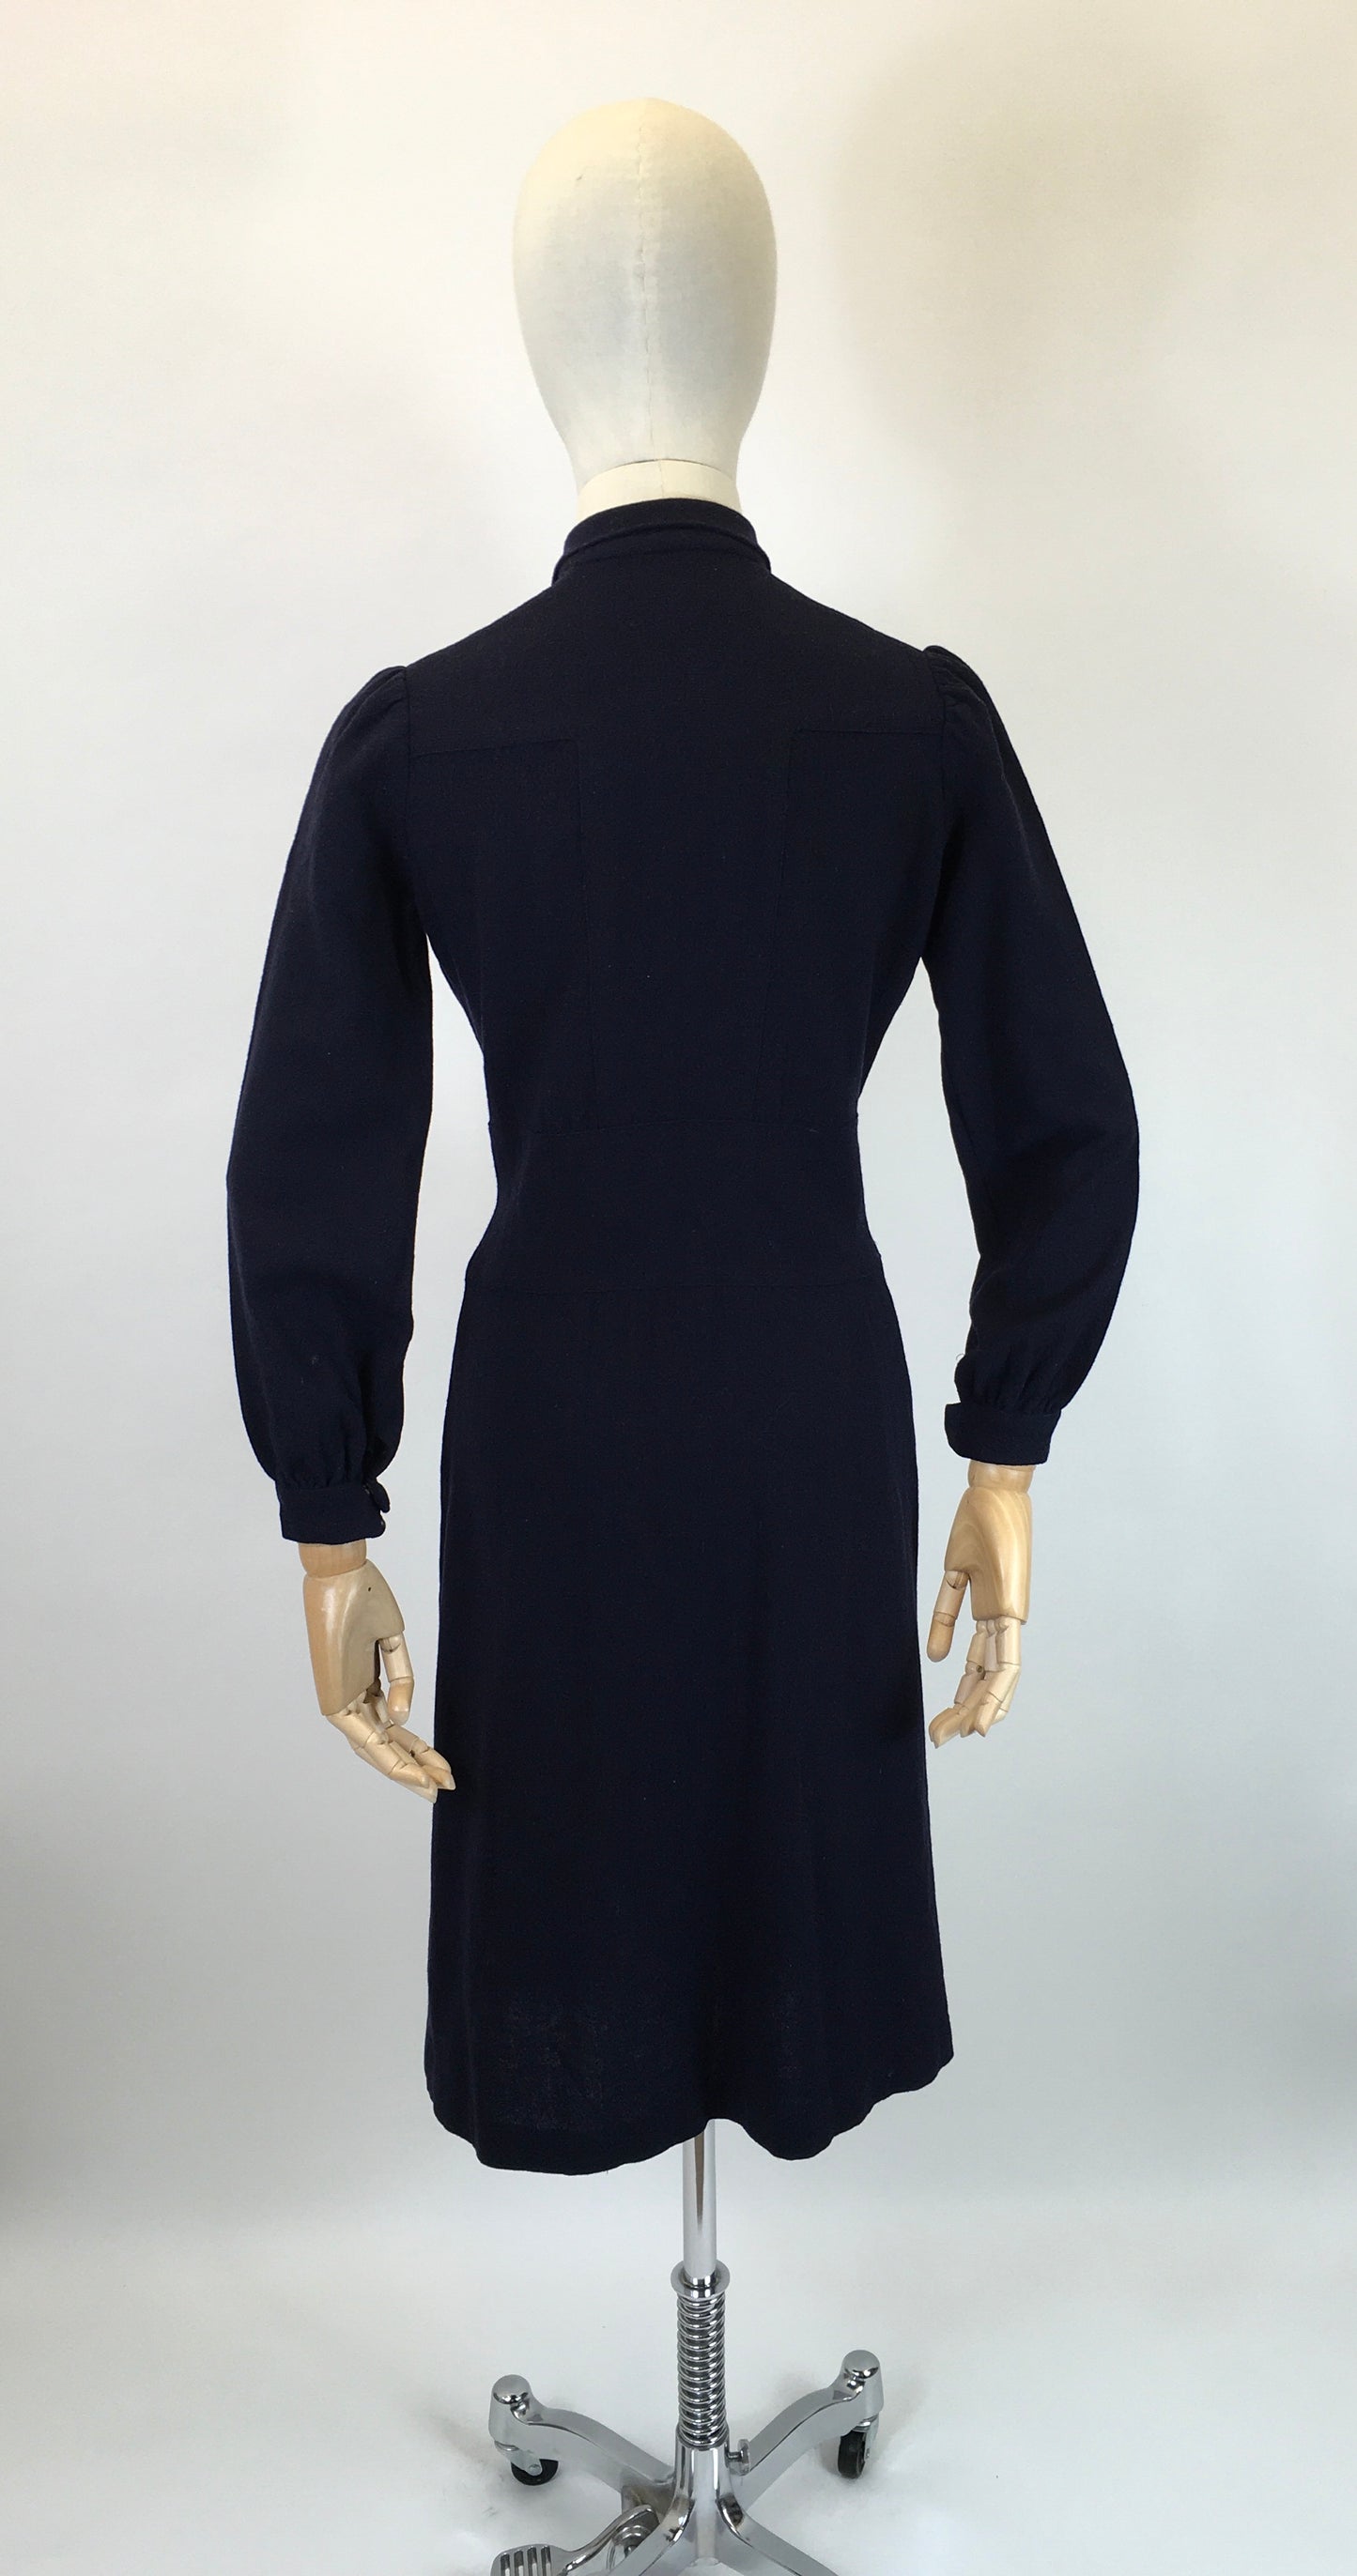 Original 1940’s Fabulous Navy Wool Dress - With Peter Pan Collar, Lattice Work and Pleated Detailing